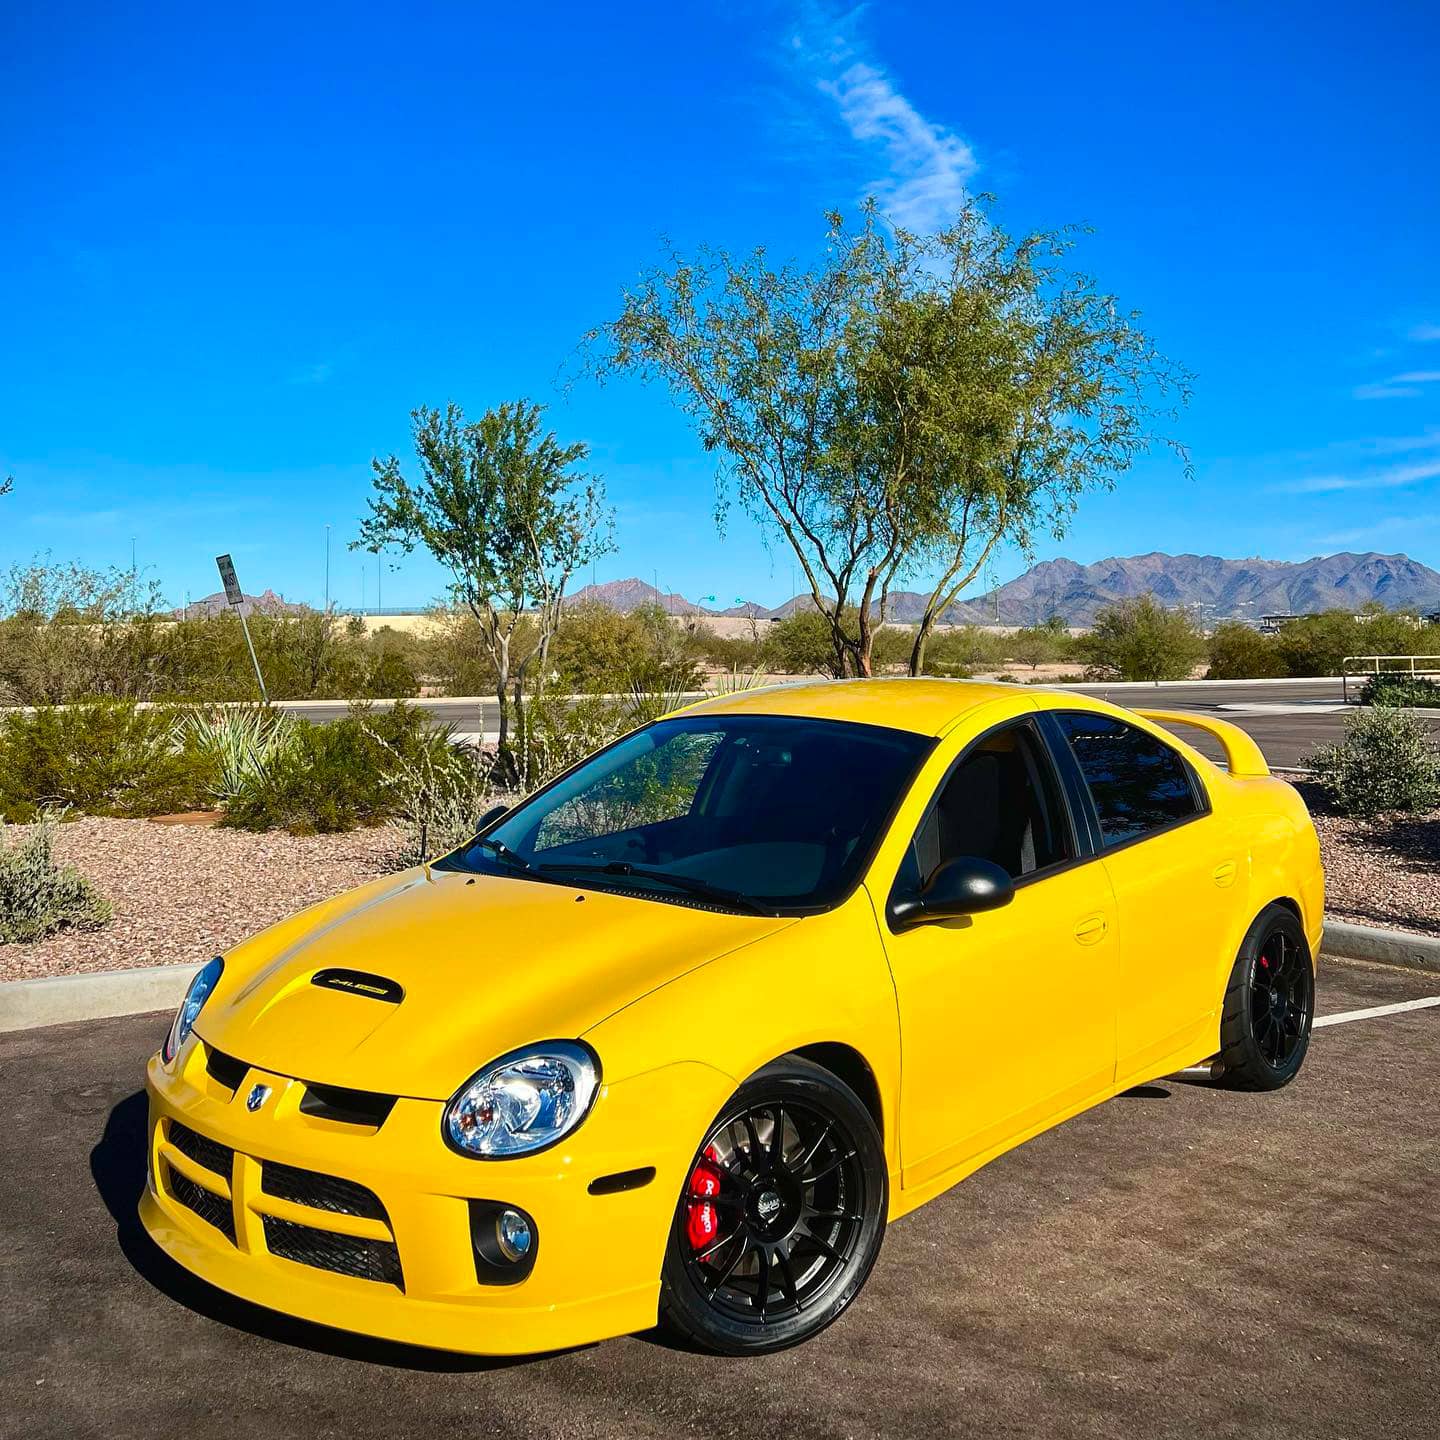 Modified Dodge Neon SRT4 in yellow color with black rims